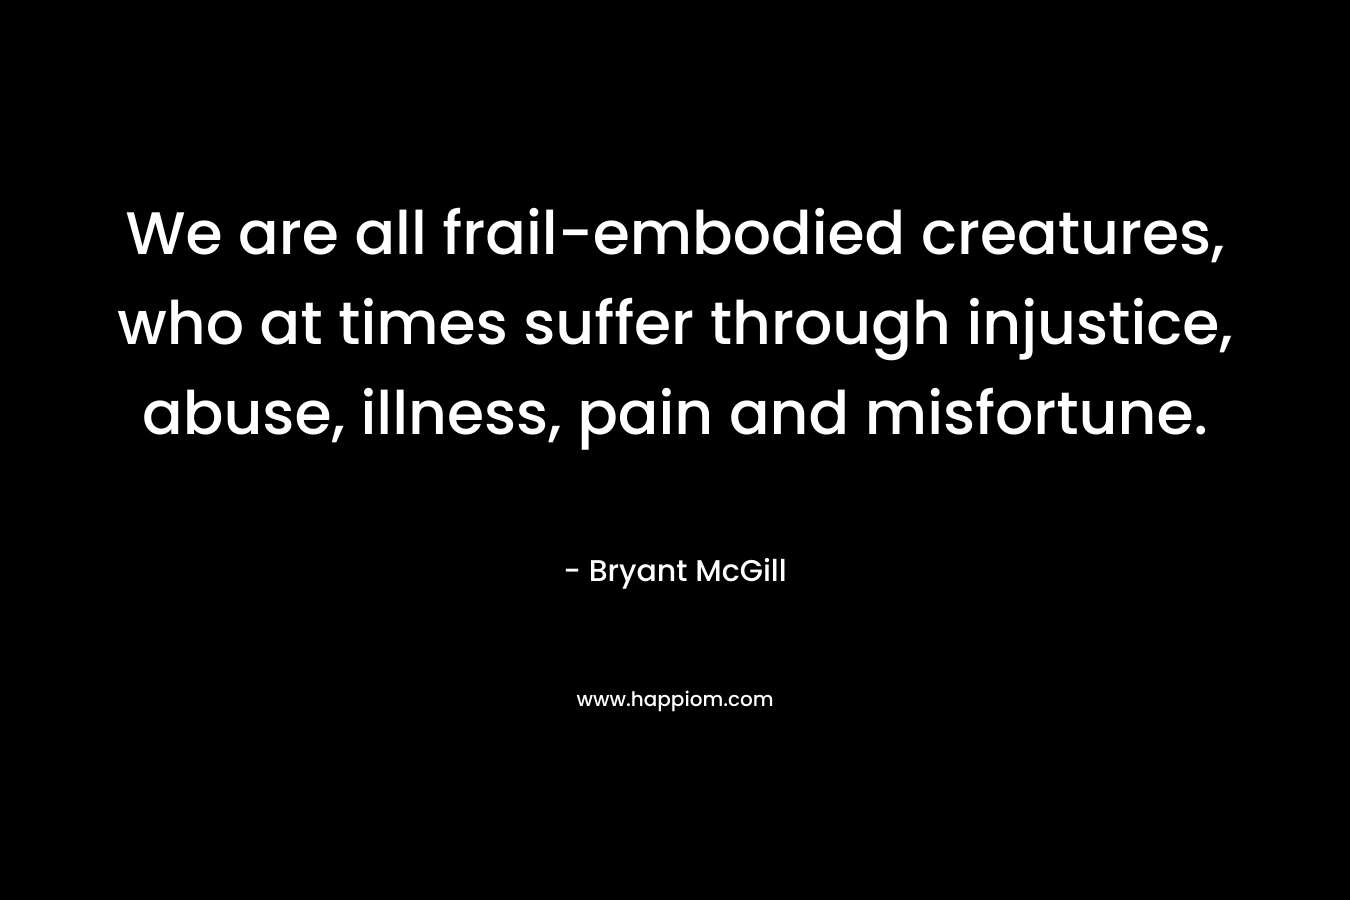 We are all frail-embodied creatures, who at times suffer through injustice, abuse, illness, pain and misfortune. – Bryant McGill